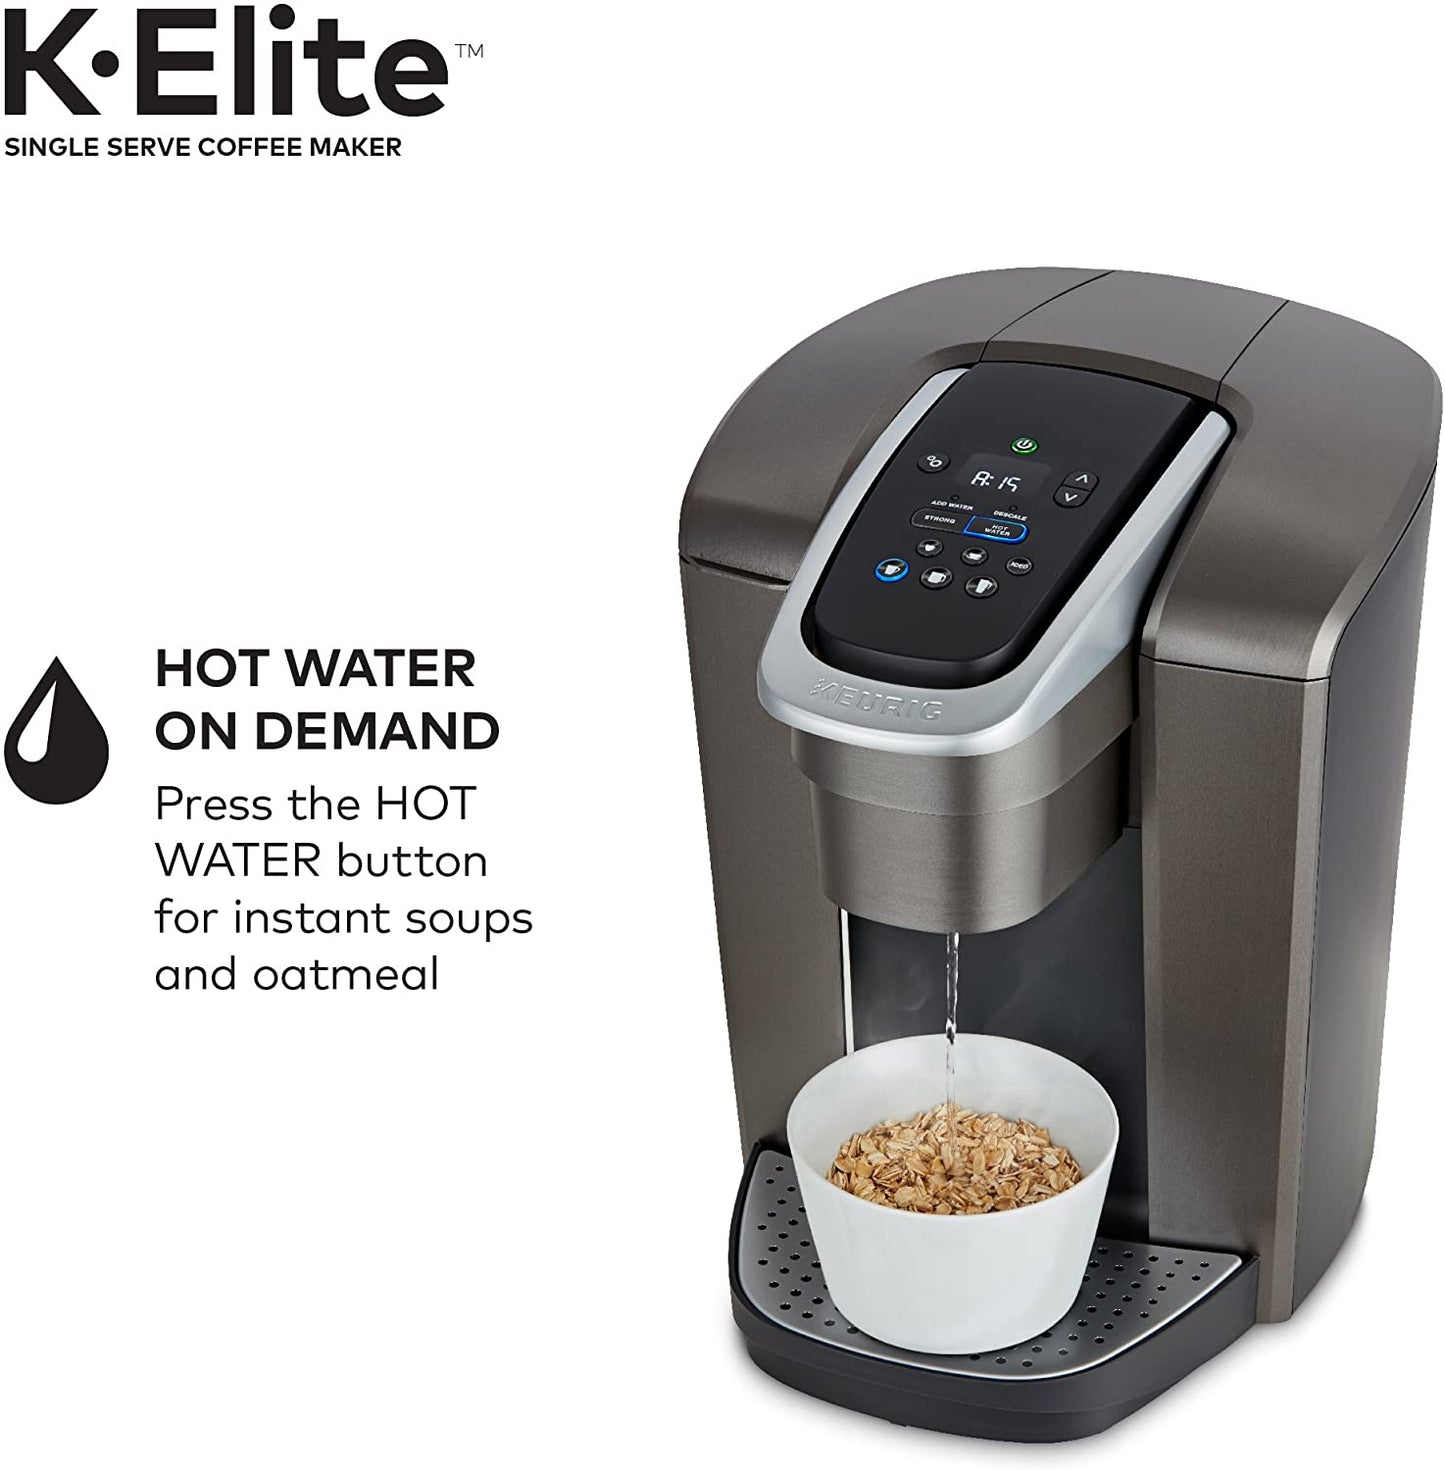 Keurig K-Elite Coffee Maker, Single Serve K-Cup Pod Coffee Brewer, With Iced Coffee Capability, Brushed Slat